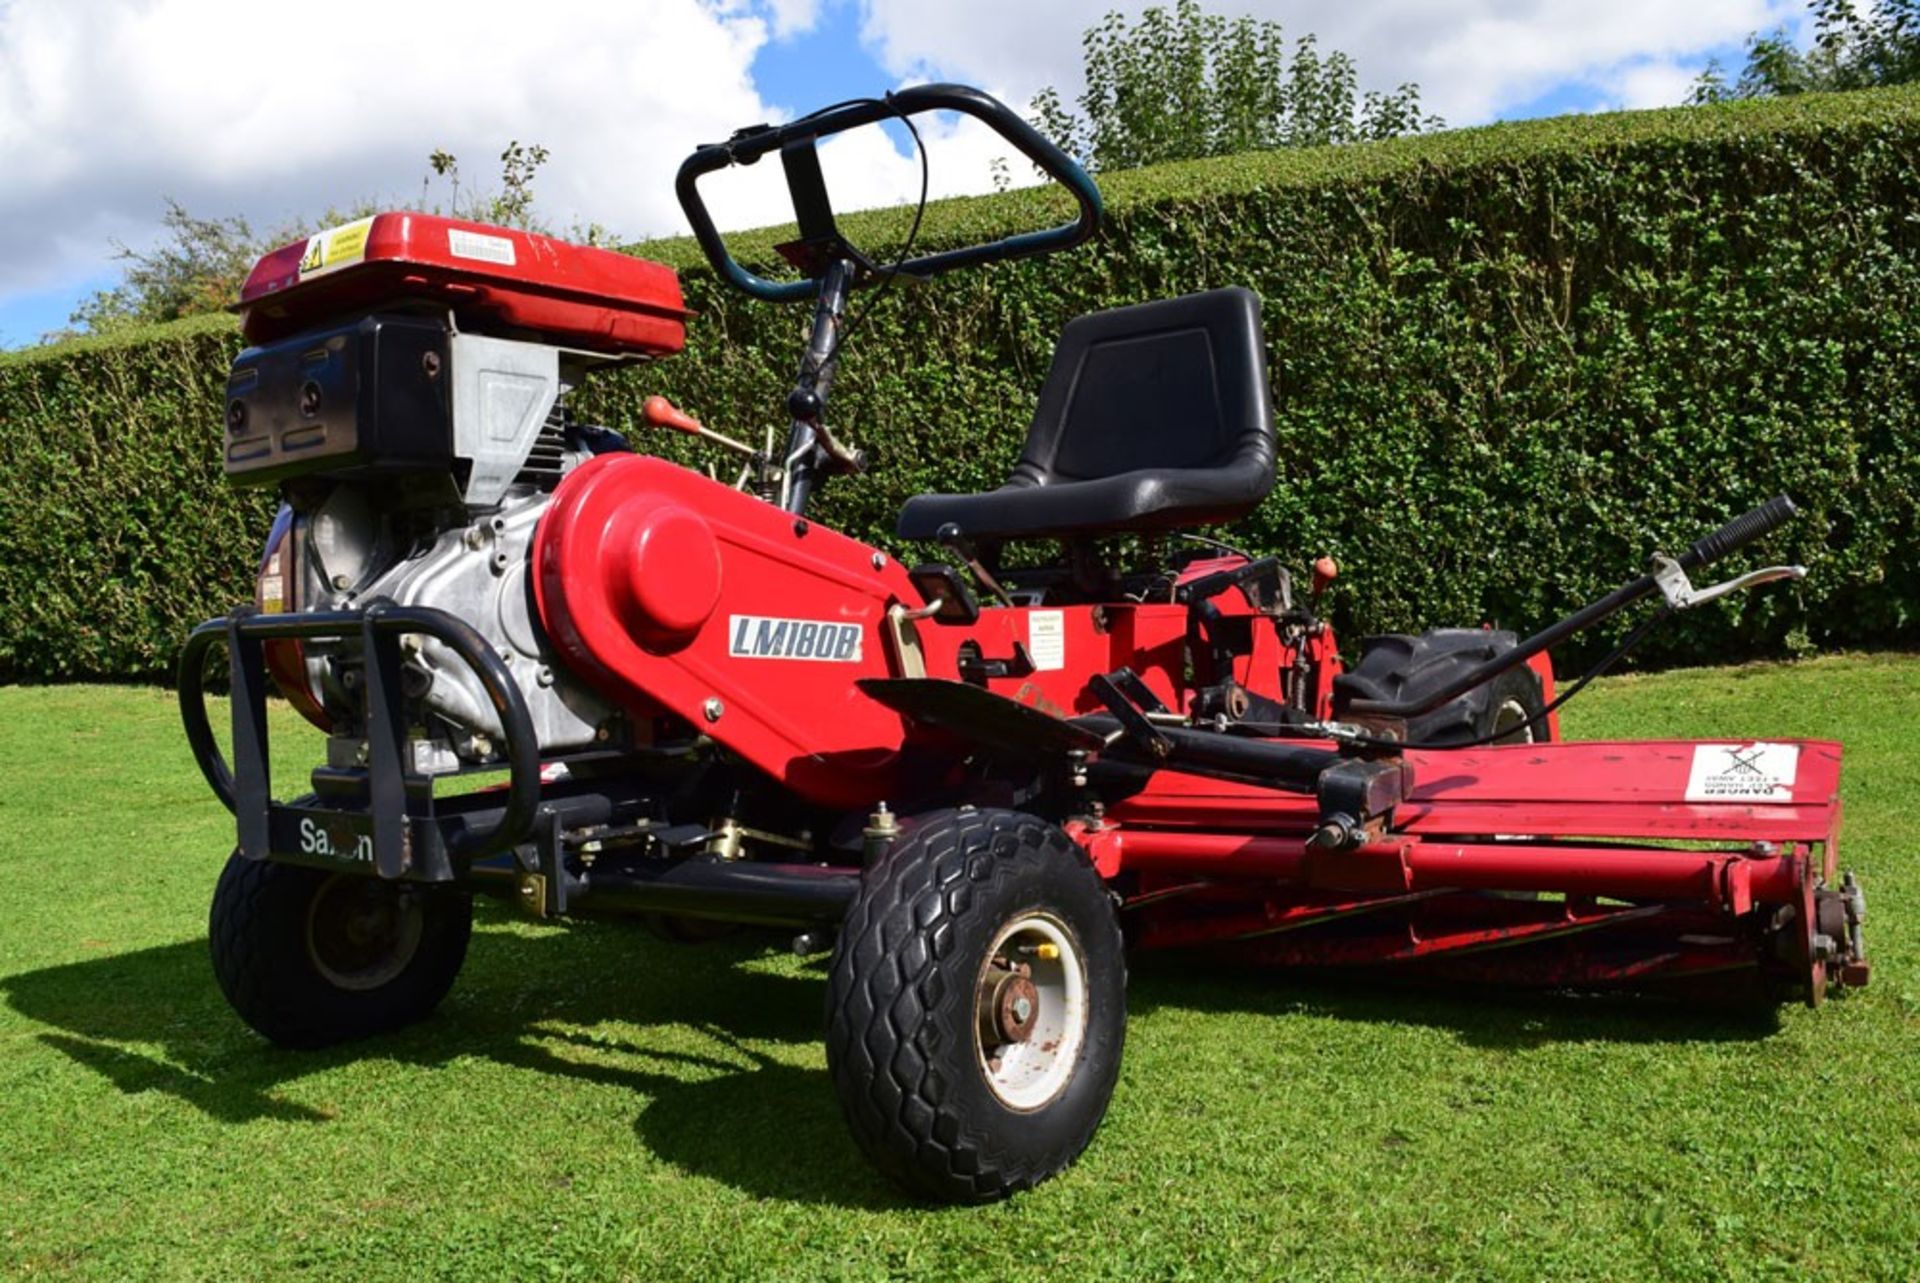 Saxon Triple LM180B Ride On Cylinder Mower - Image 6 of 6